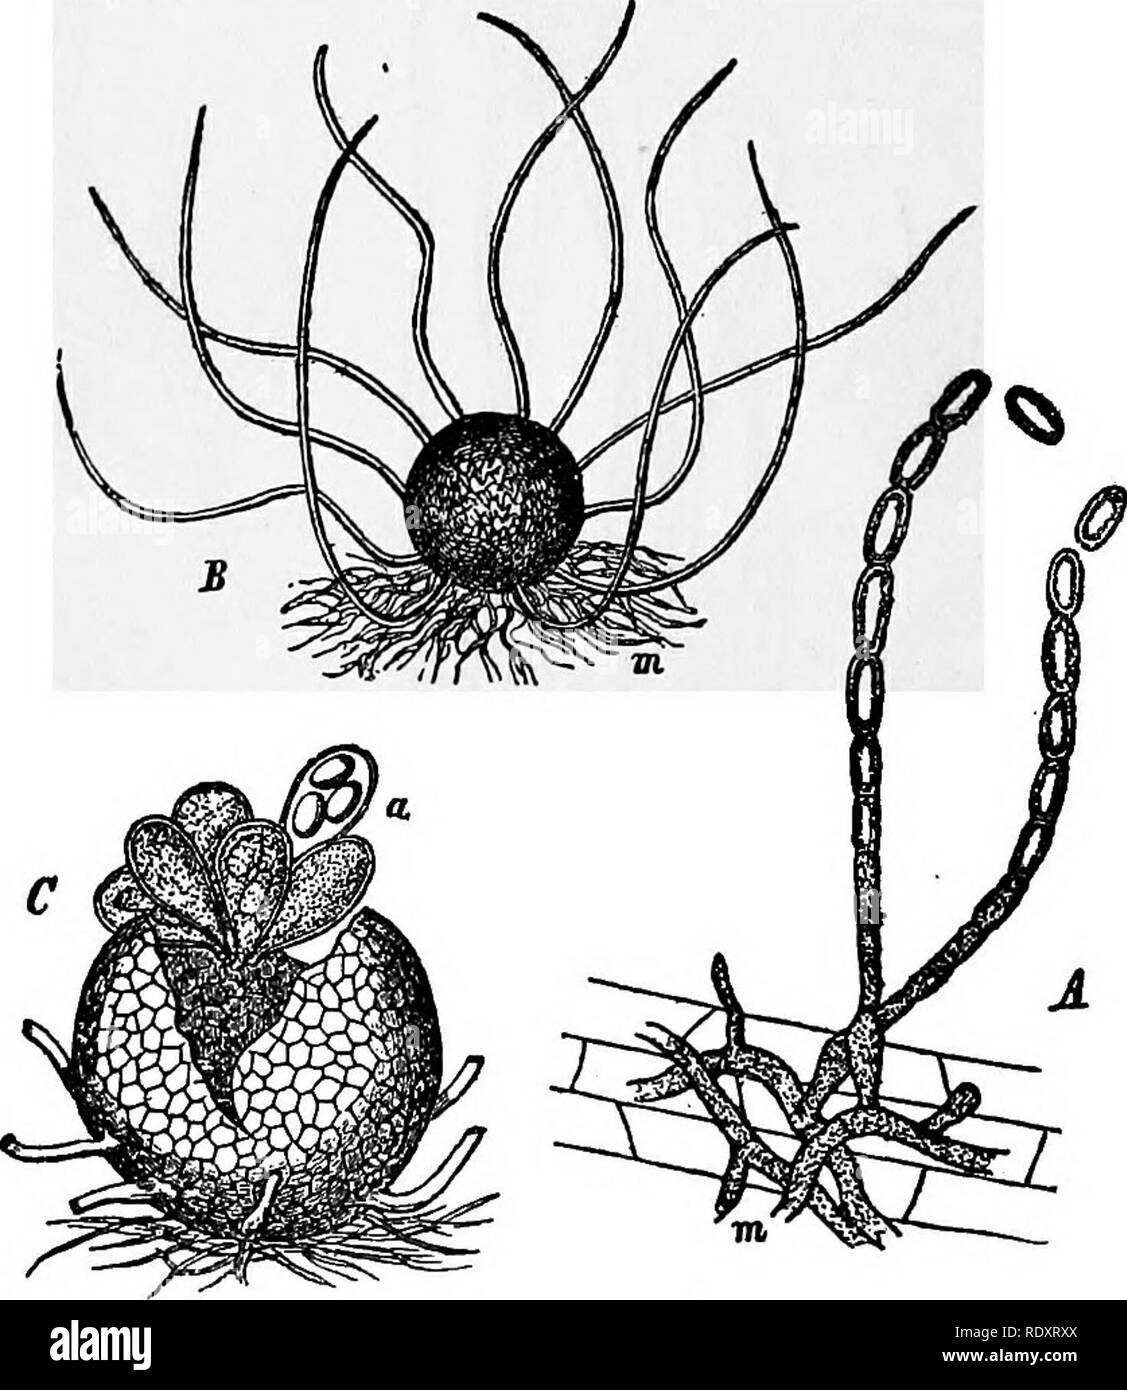 . A manual of poisonous plants, chiefly of eastern North America, with brief notes on economic and medicinal plants, and numerous illustrations. Poisonous plants. Fig. 92. Powdery Mildew. Sphaerotheca Castagnei. 1. Oogonium .(o) and anther* idium (o). 2. Separation of antheridium cell. 3. Fertilization and formation of addi- tional cells. 5-8. Further development of cells. All greatly magnified. After Harper.. Fig. 93. Powdery Mildew of Grass (.Erysiphe graminis). A. Oidium stage and mycelium m. B. Perithecium witti appendages and mycelium m. C. Perithecium with asci and ascospores. After Fran Stock Photo